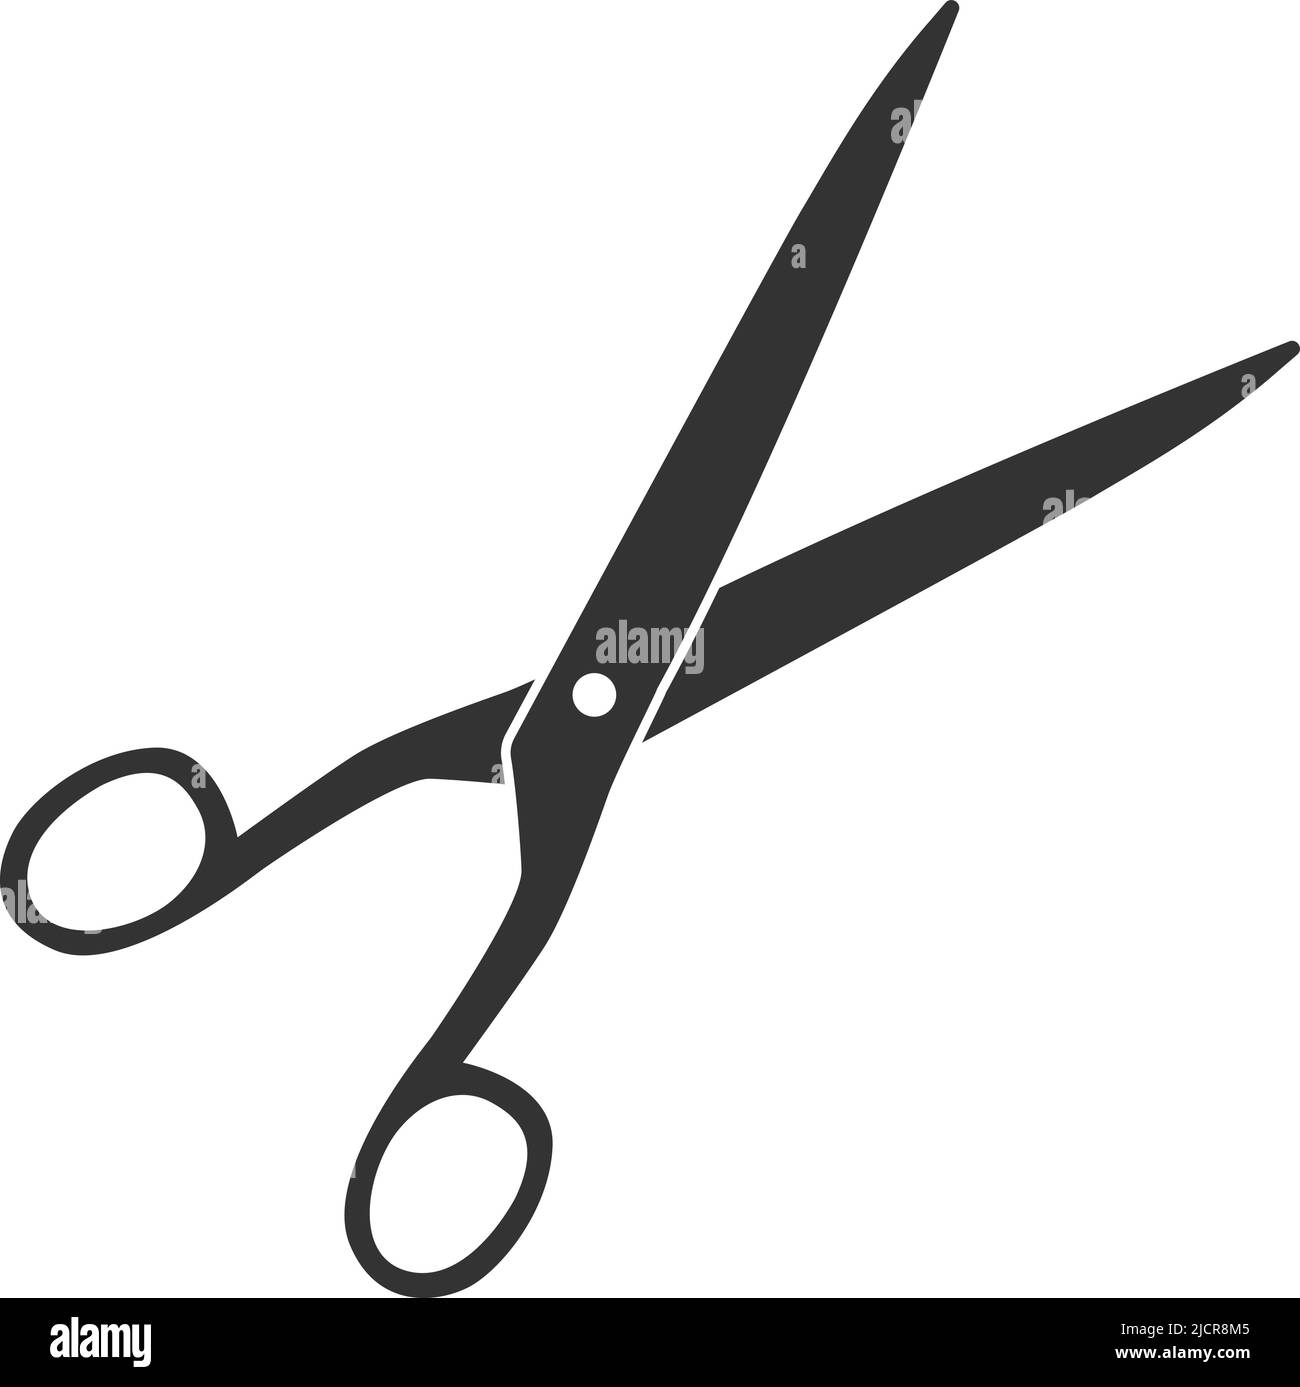 pair of scissors symbol isolated on white background, vector illustration Stock Vector